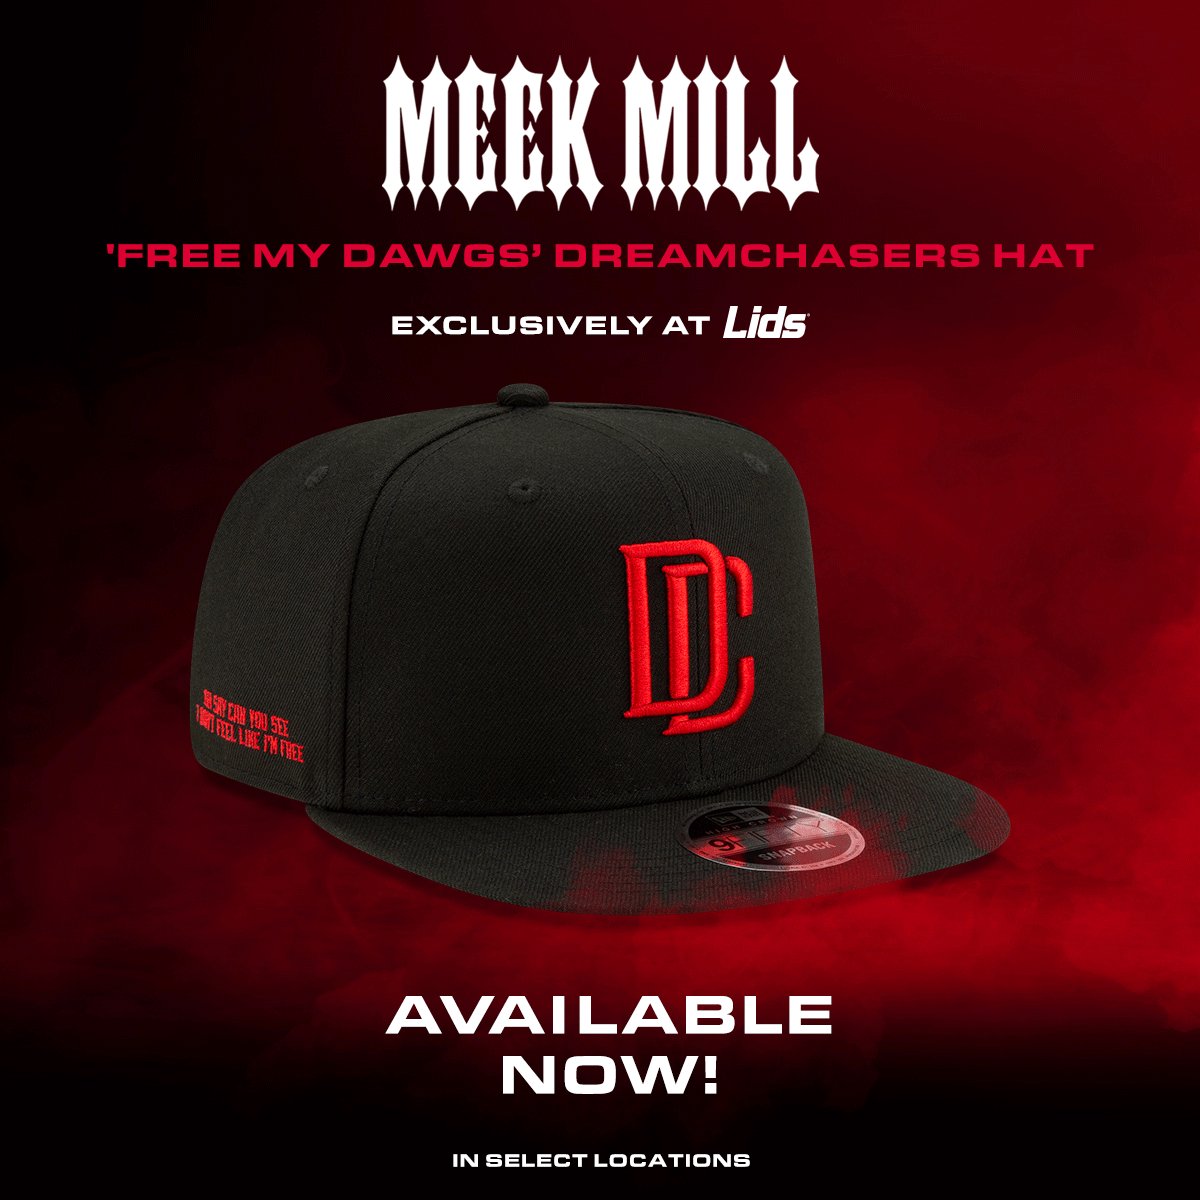 My Dawgs @DreamChasers hat now at @lids 